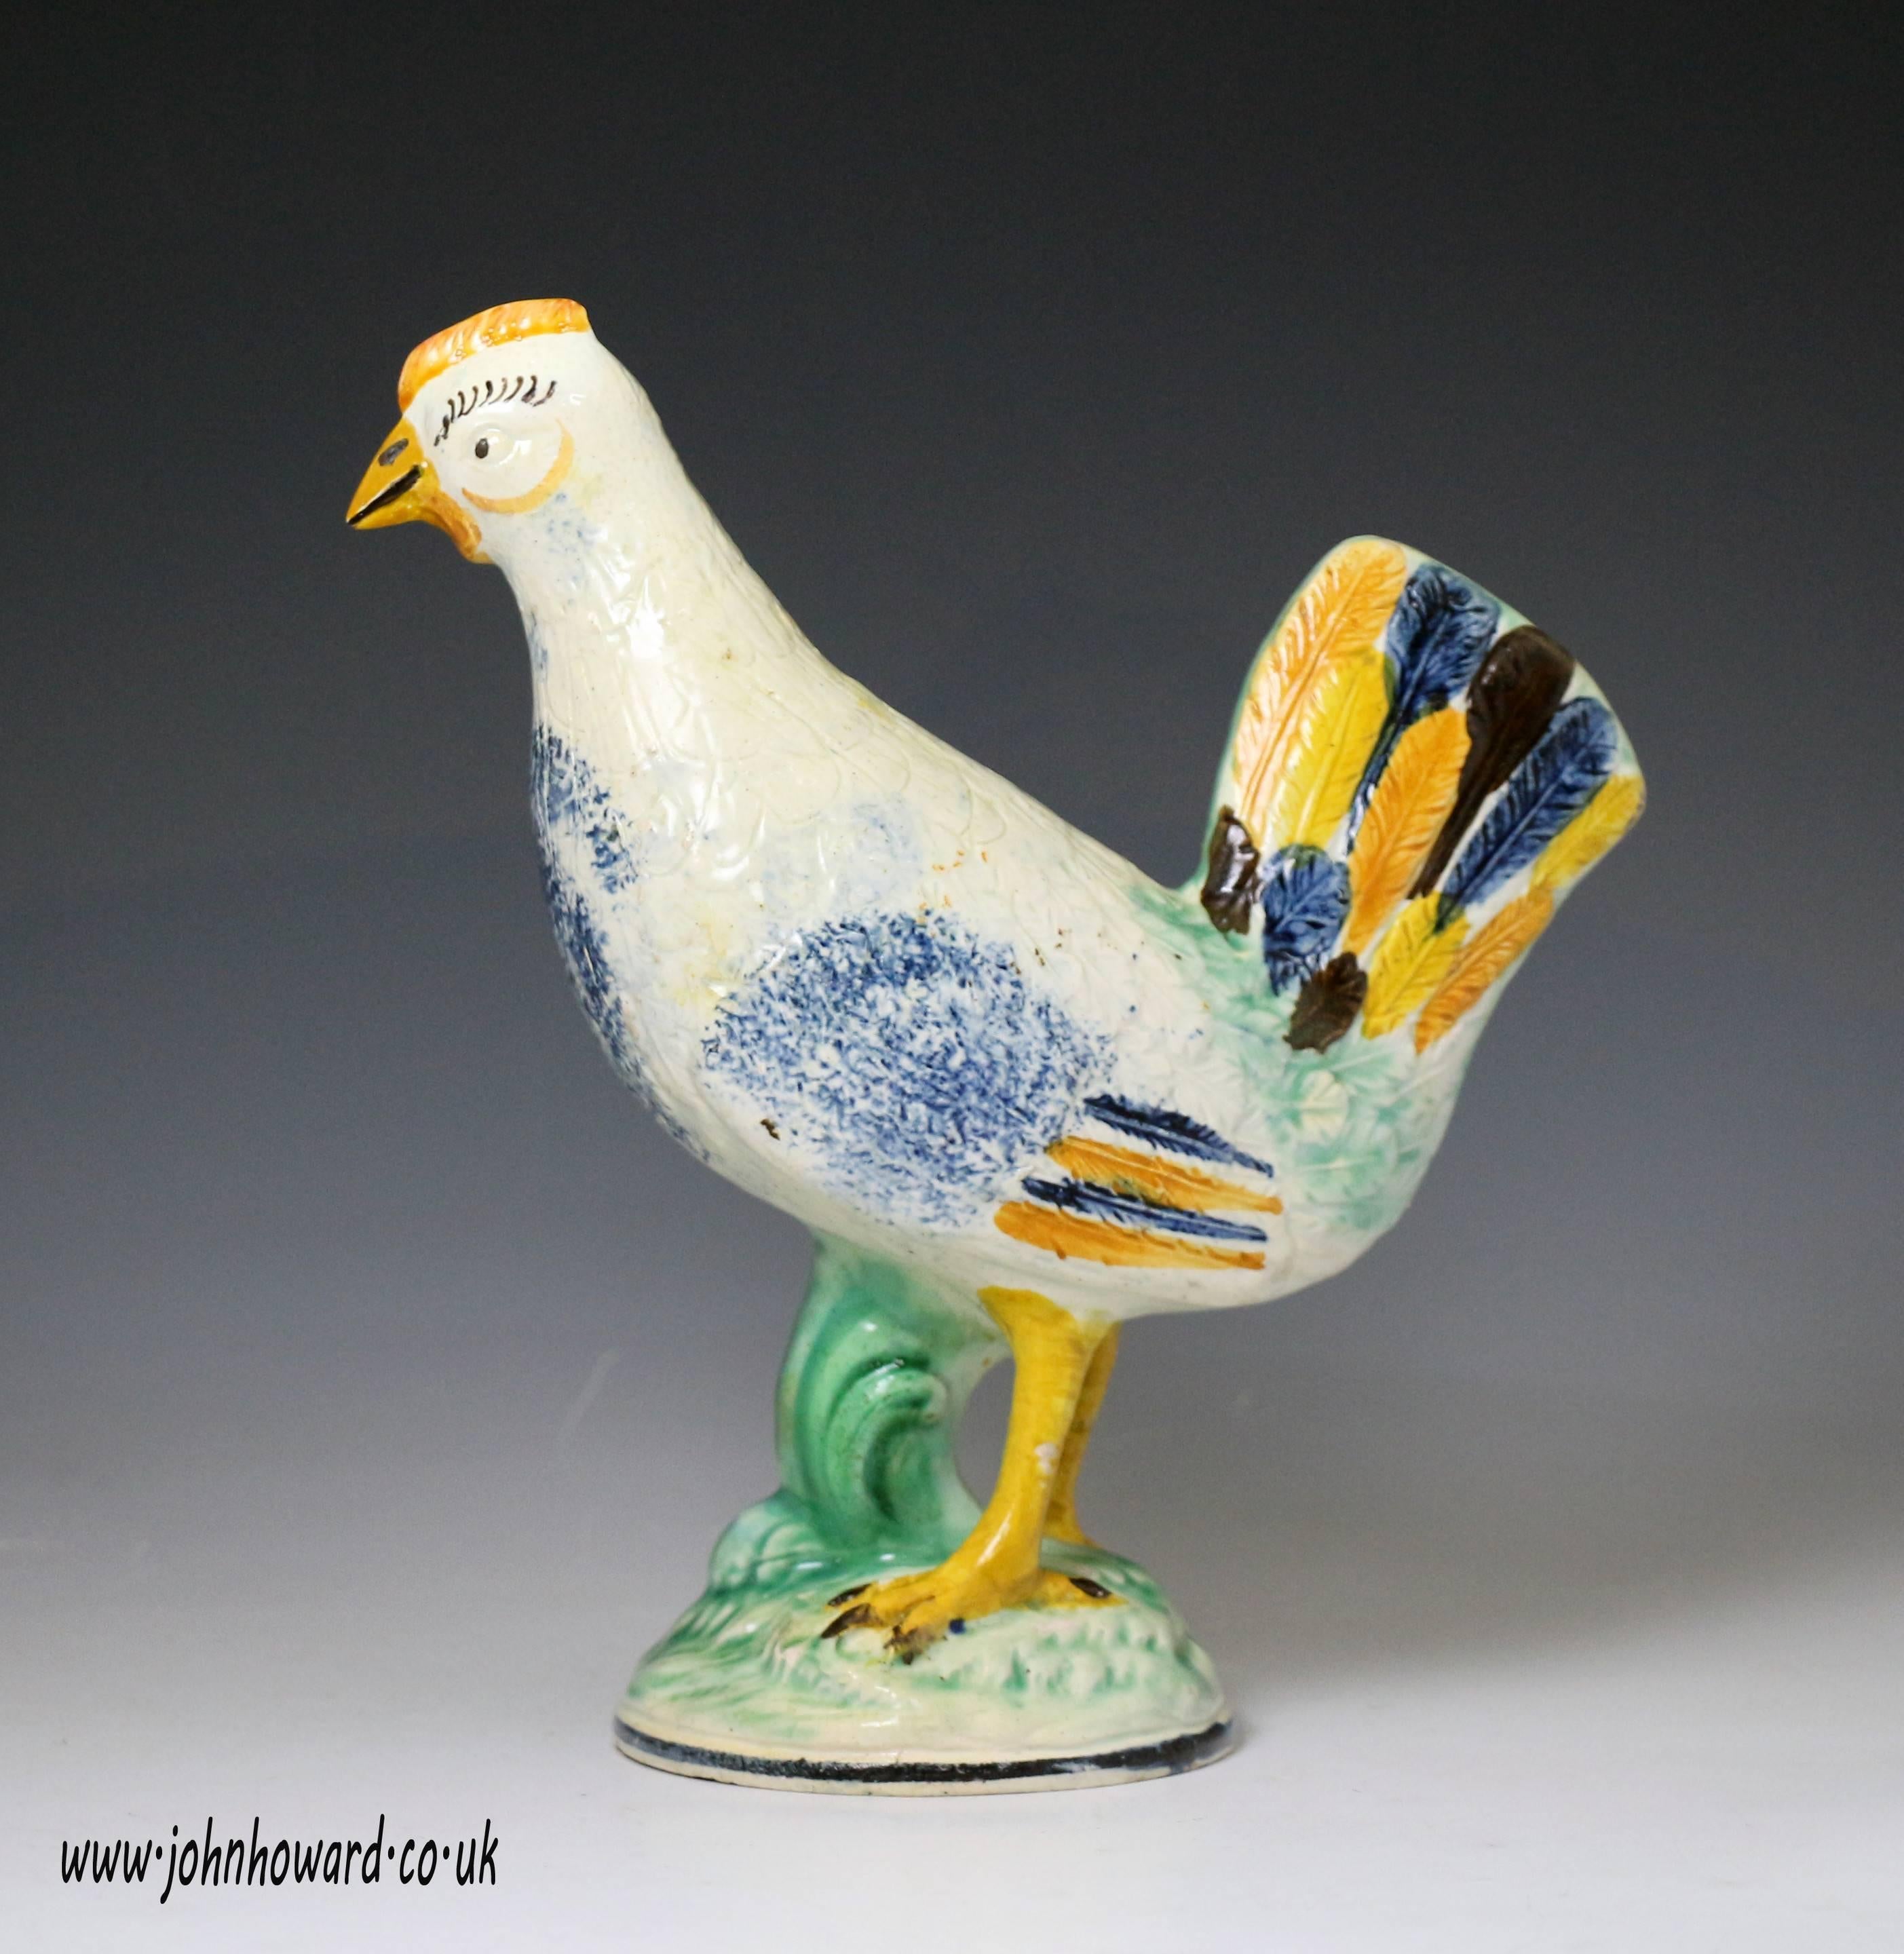 A fine English pottery prattware pottery standing figure of hen on base. 
The figure is crisply and character fully modelled with good application of color.